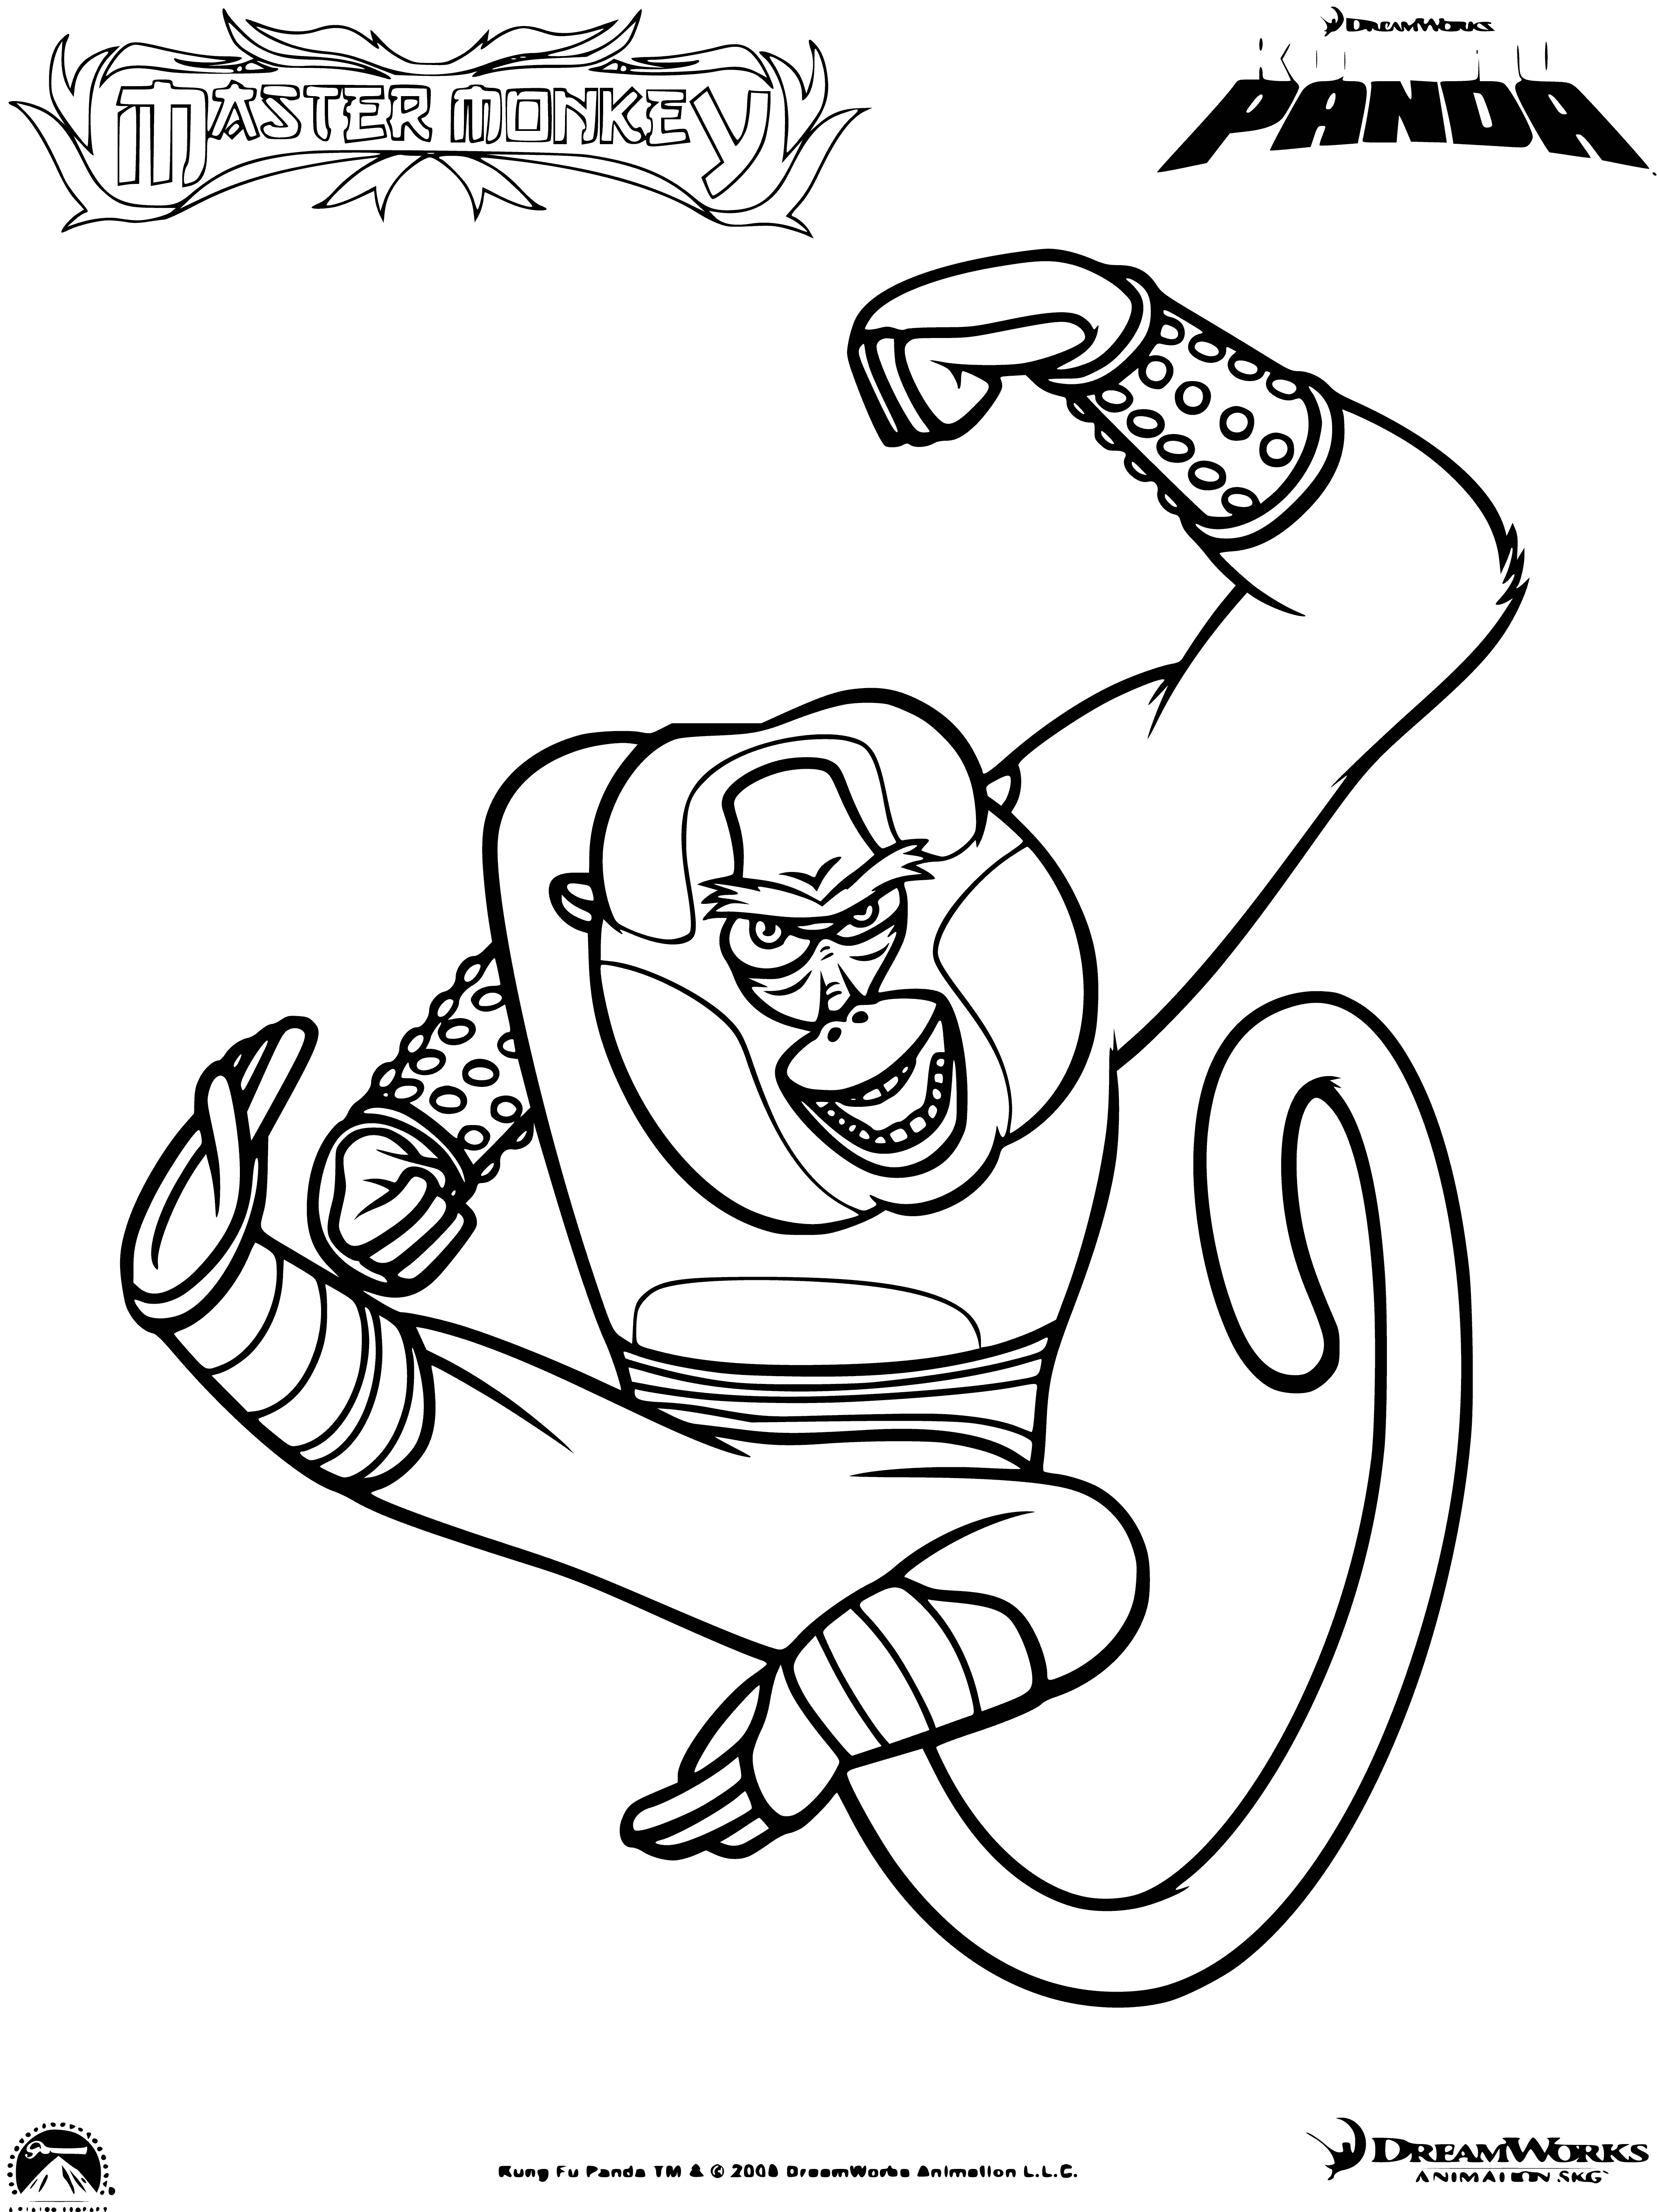 Master Monkey coloring page